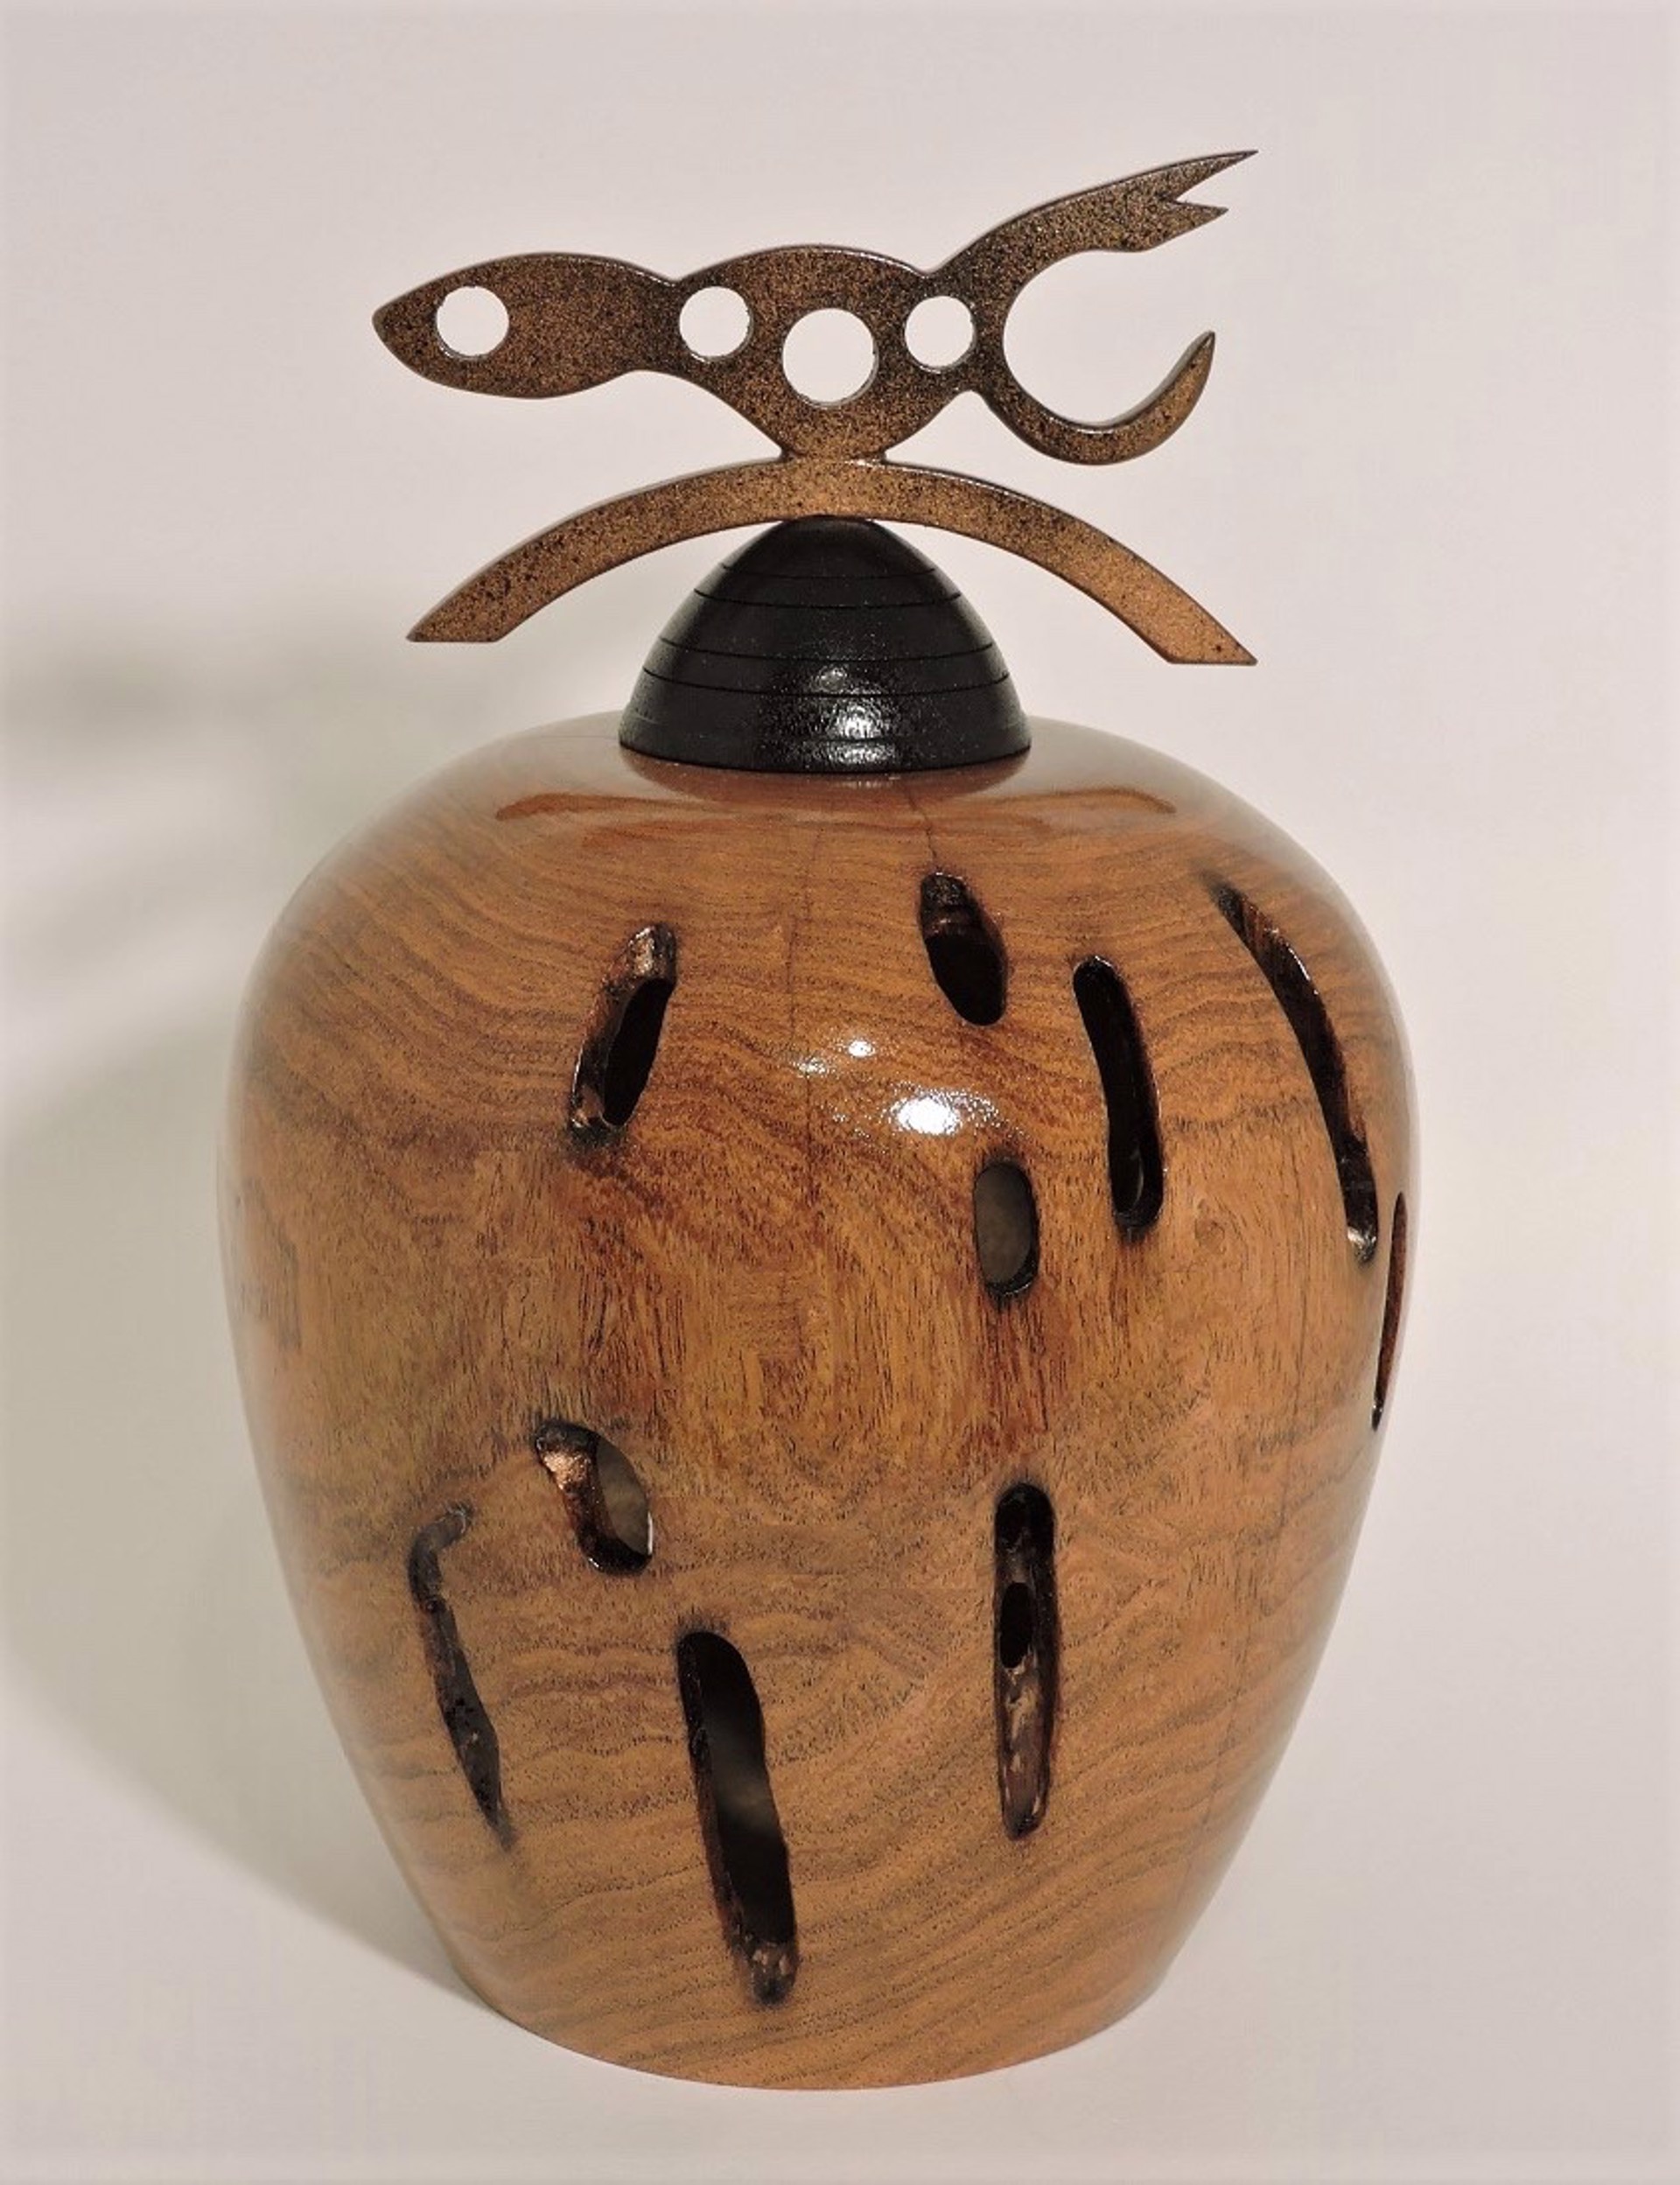 Mesquite with Copper Accents - Hollow Form by Jim Scott